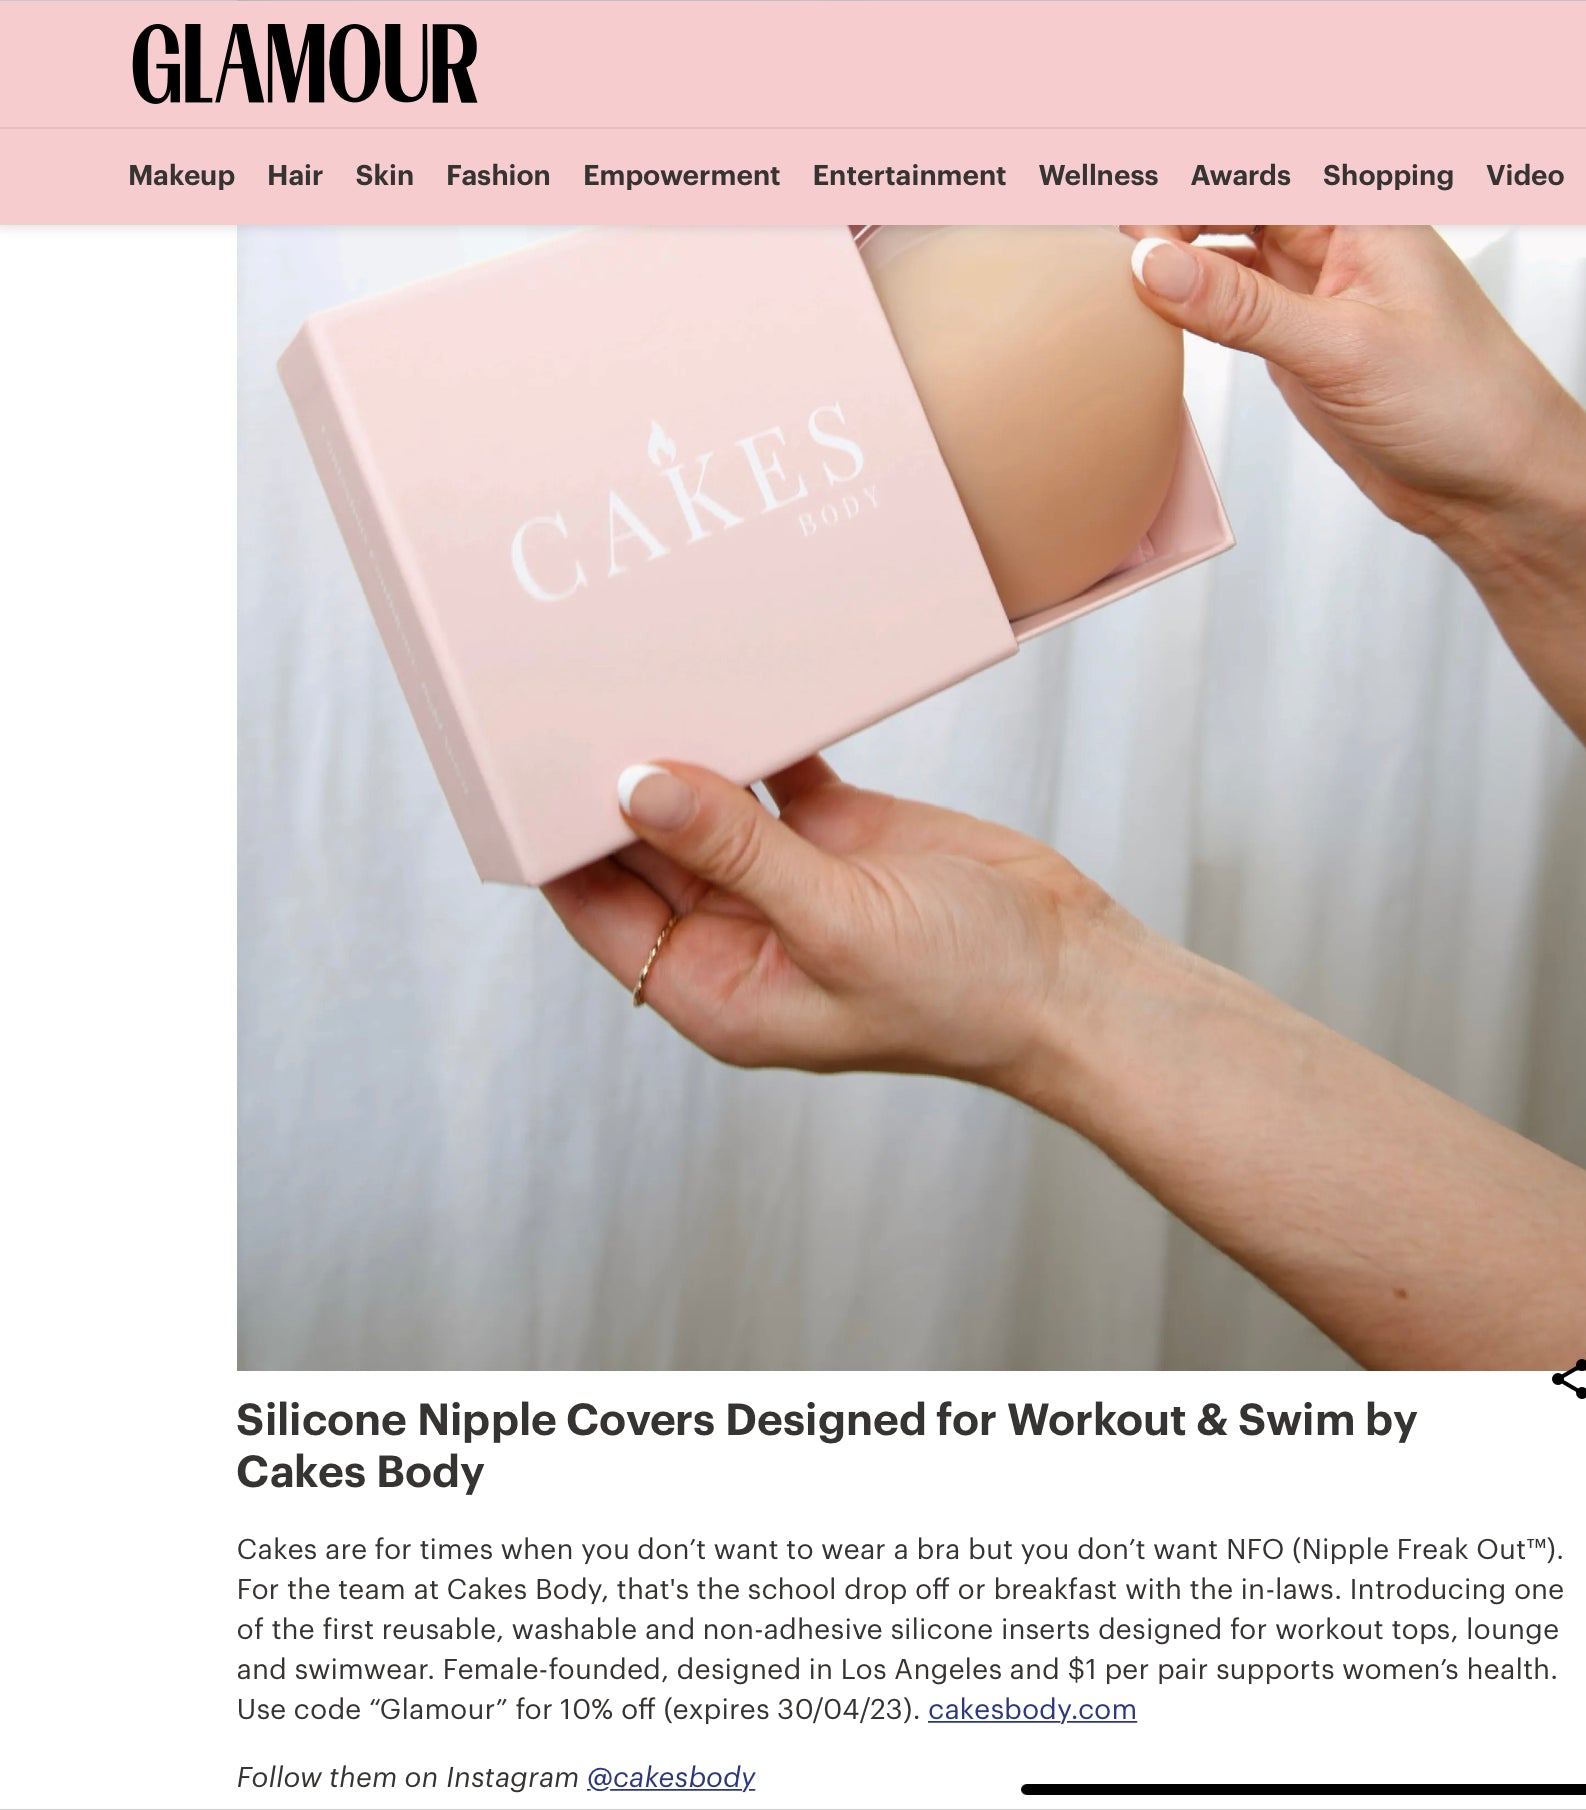 CAKES Body - Reusable, Washable, Non-Adhesive Silicone Inserts